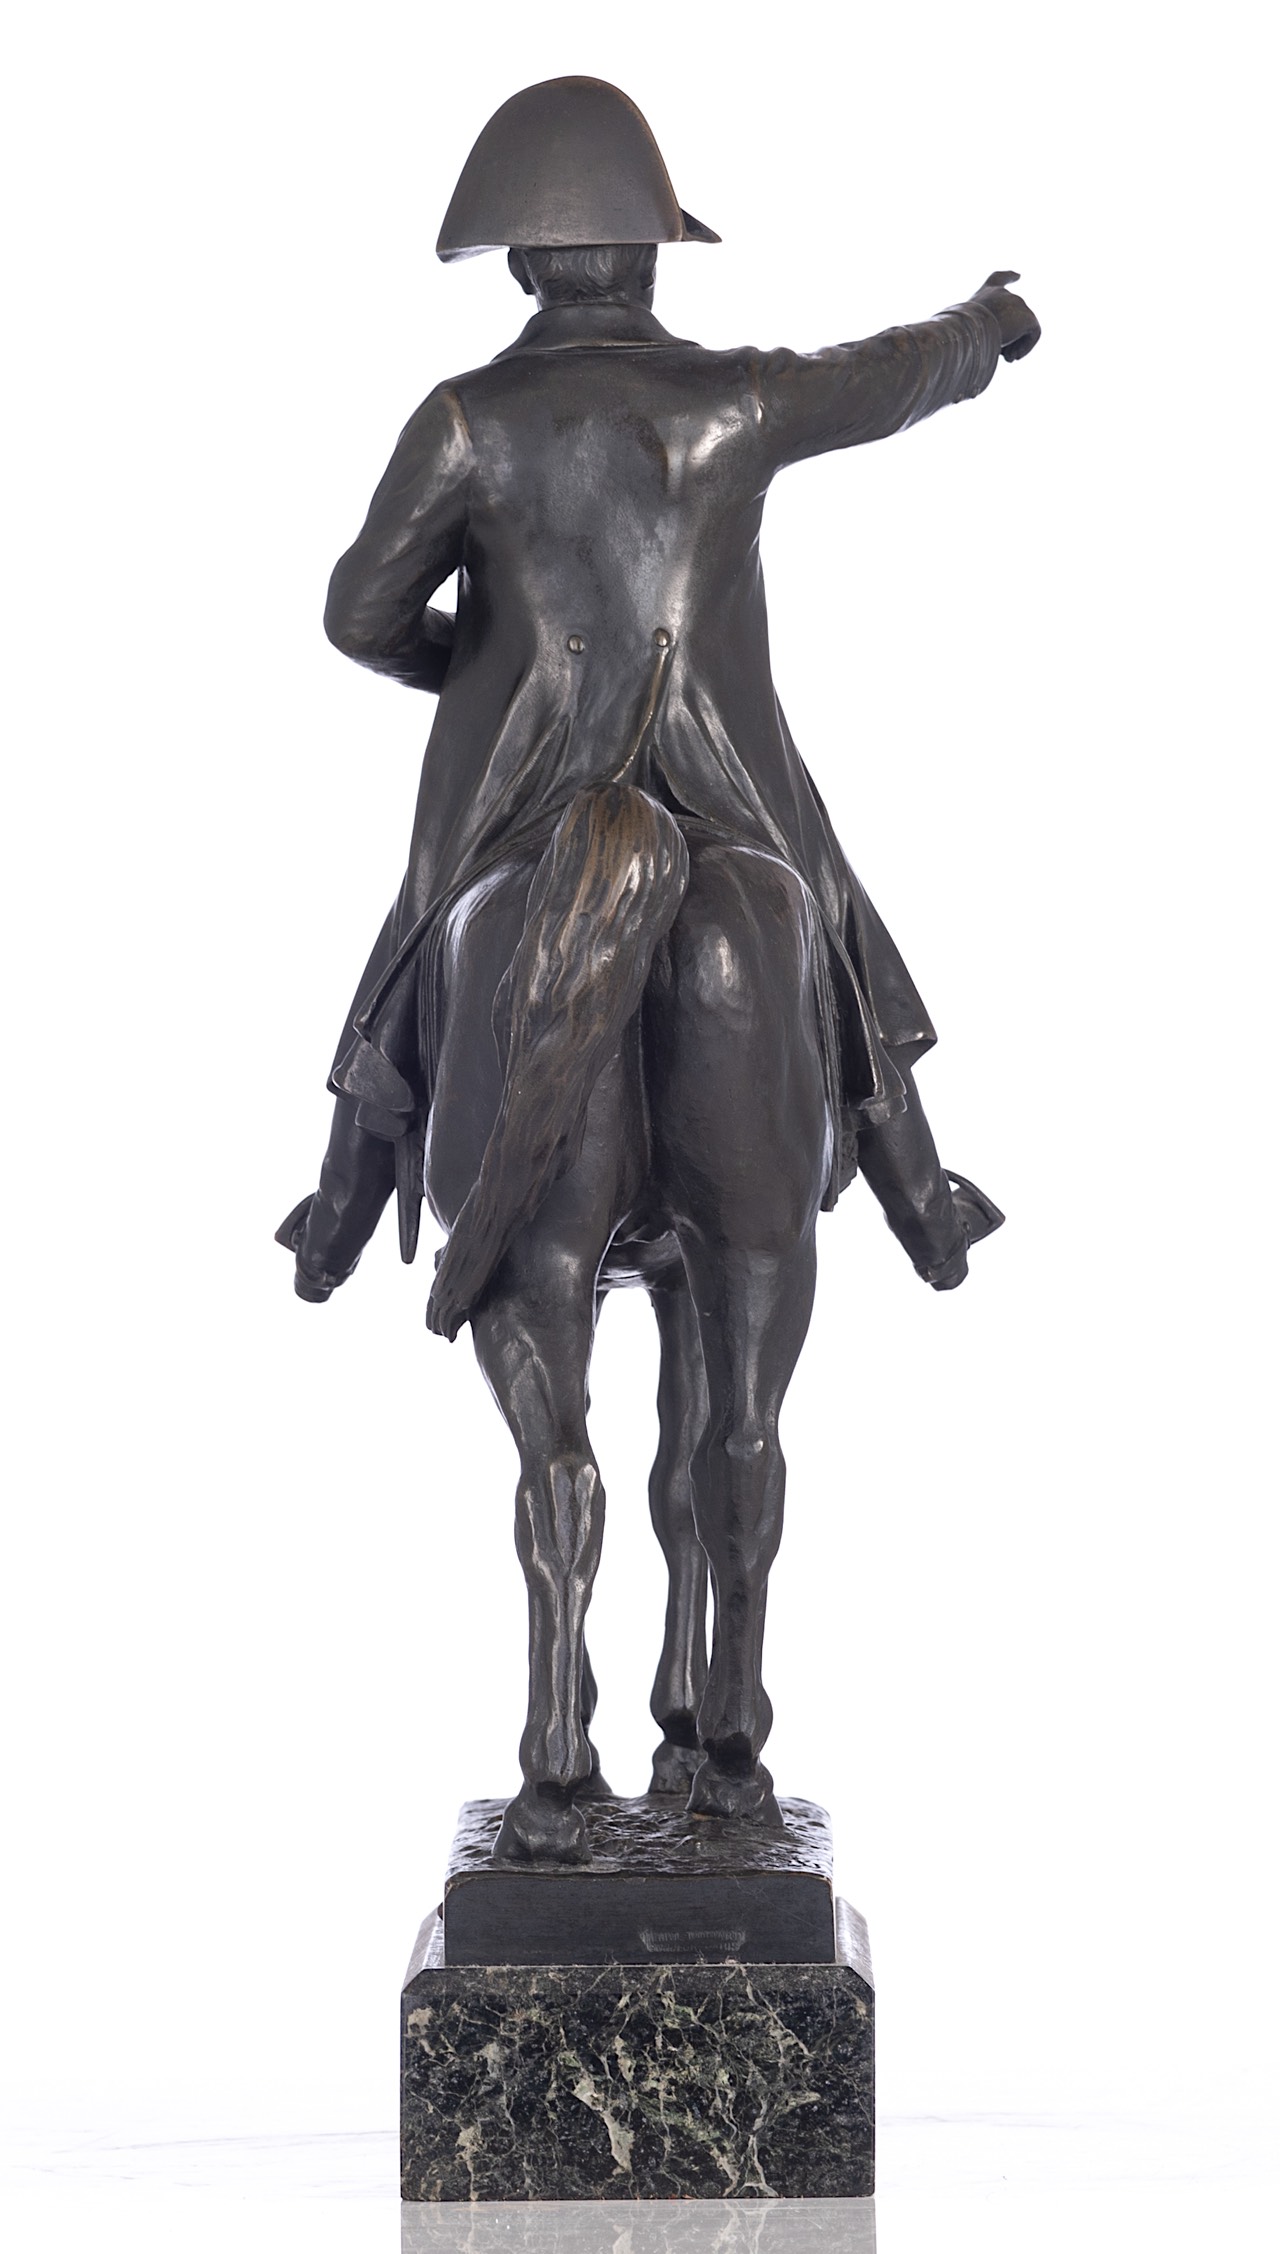 Ernest Charles Guilbert (1848-1913), Equestrian of Napoleon, 1910, patinated bronze, H 40 cm - Image 3 of 9